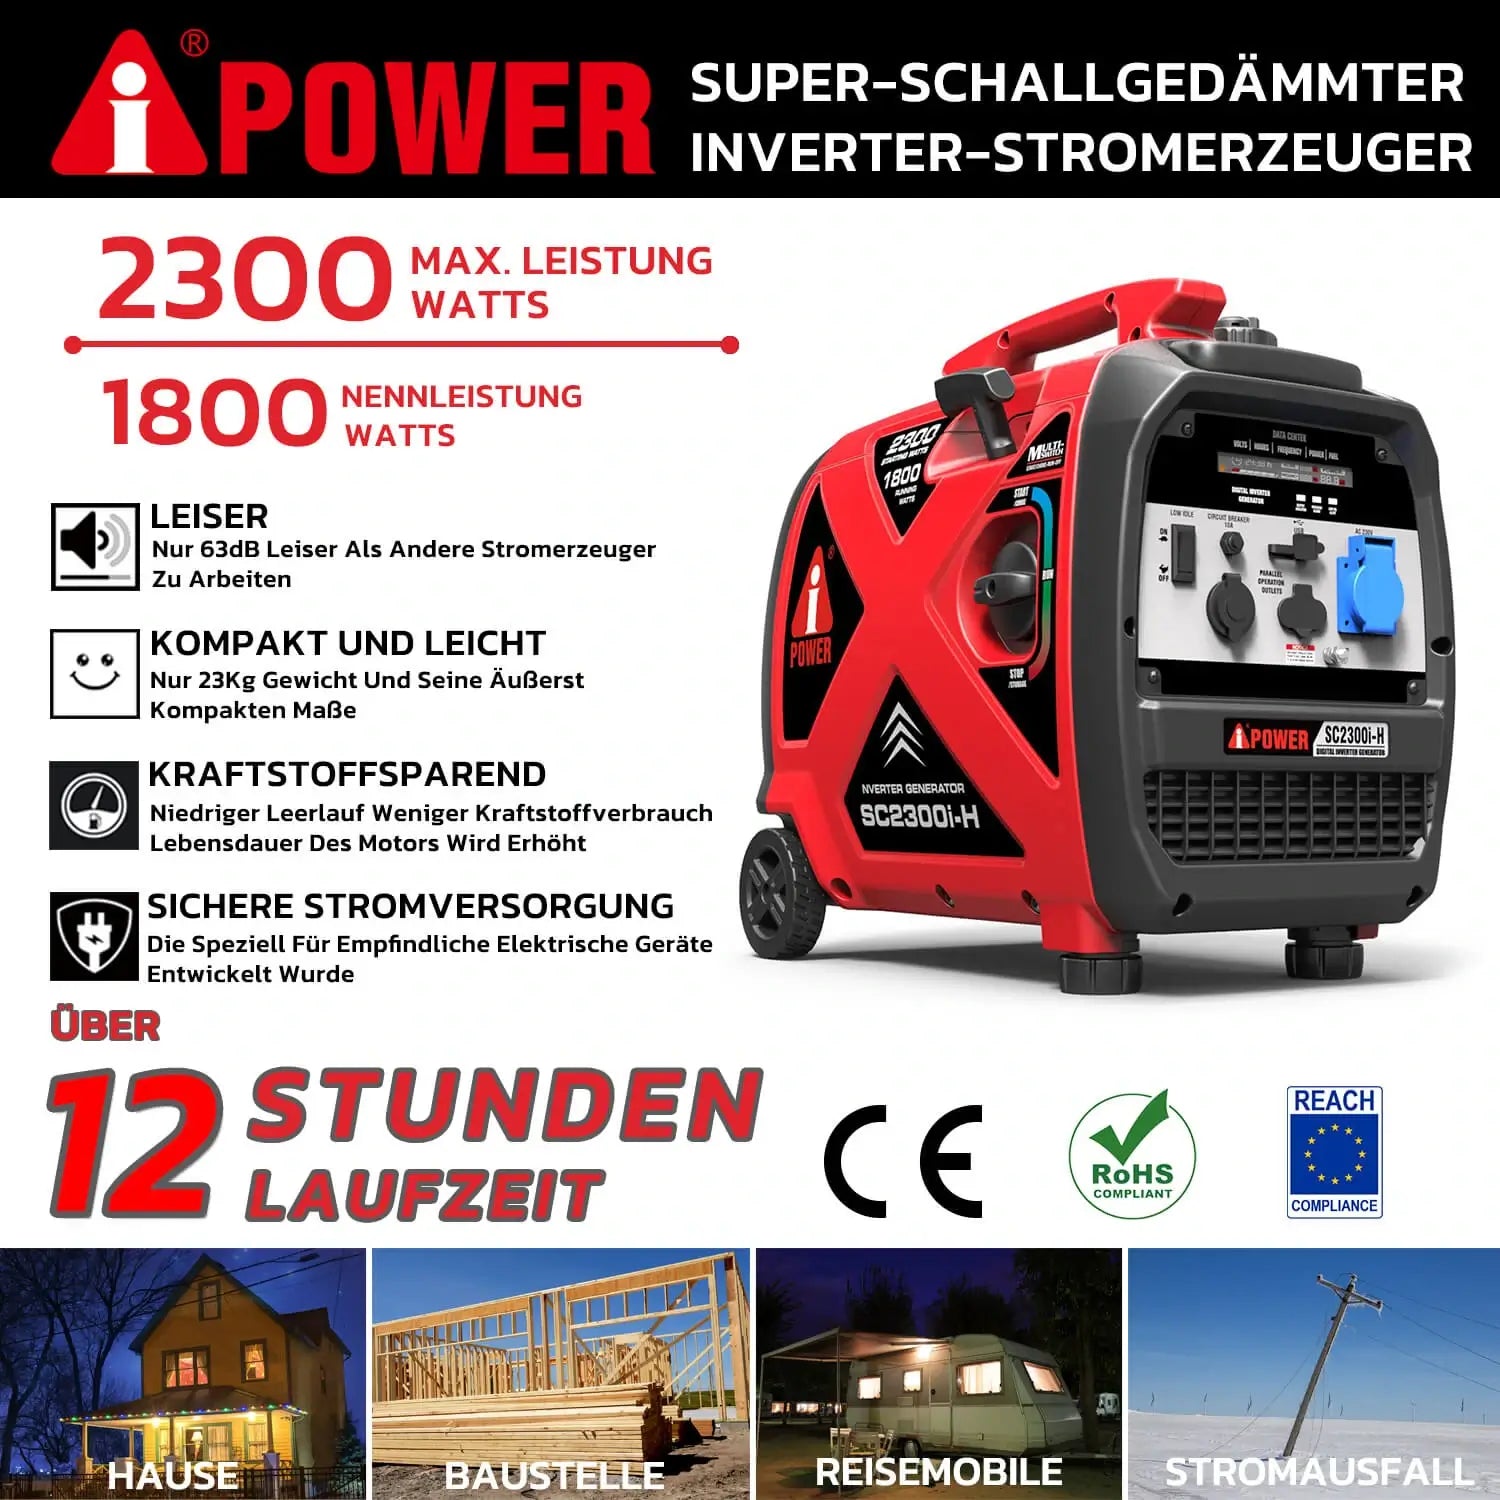 A-iPower 2300W Gasoline Powered Recoil Pull Start Portable Inverter Generator